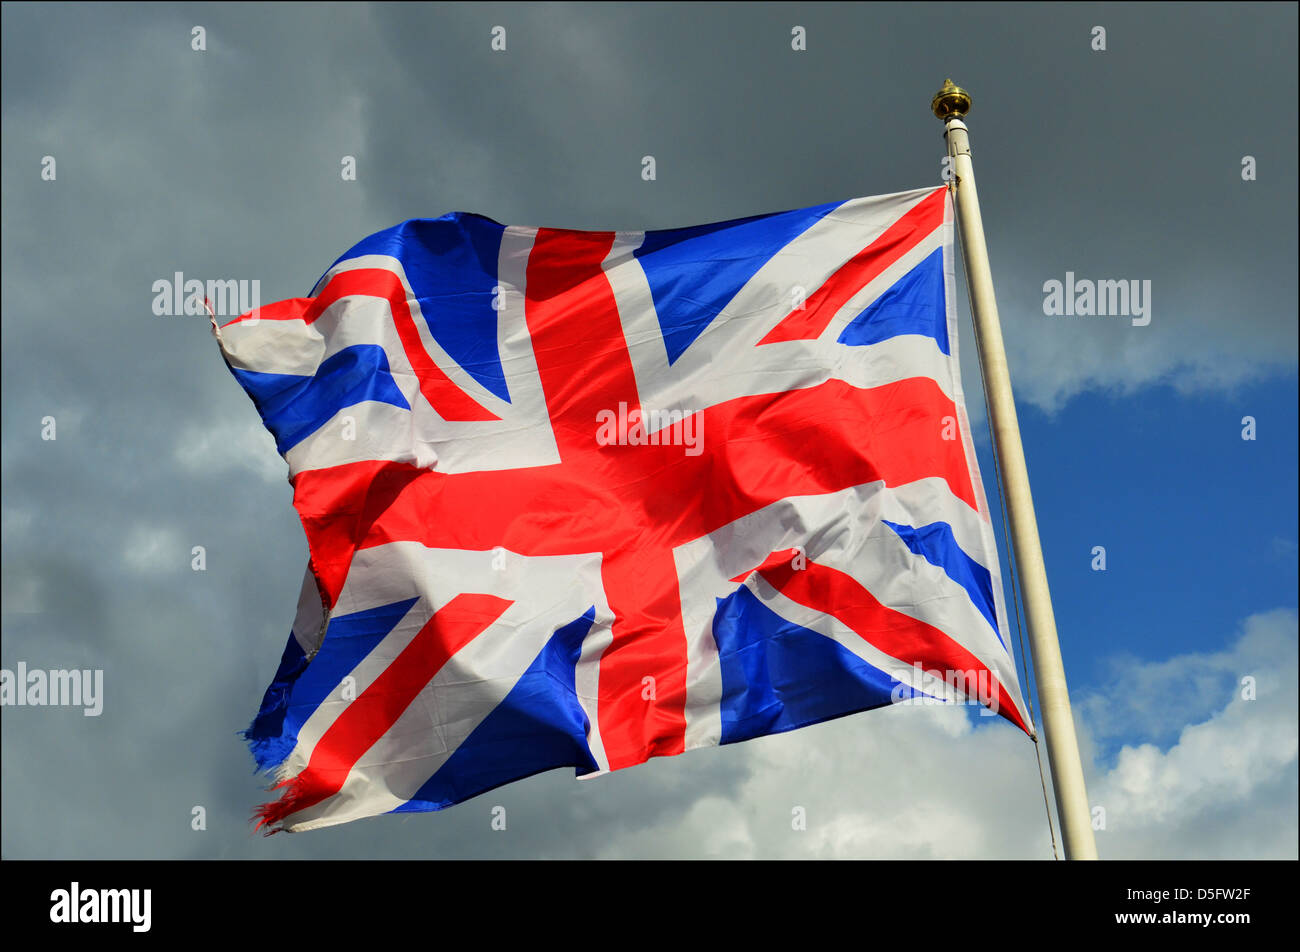 UNION JACK FLAG FLYING IN THE WIND WITH DRAMATIC SKY BEHIND Stock Photo